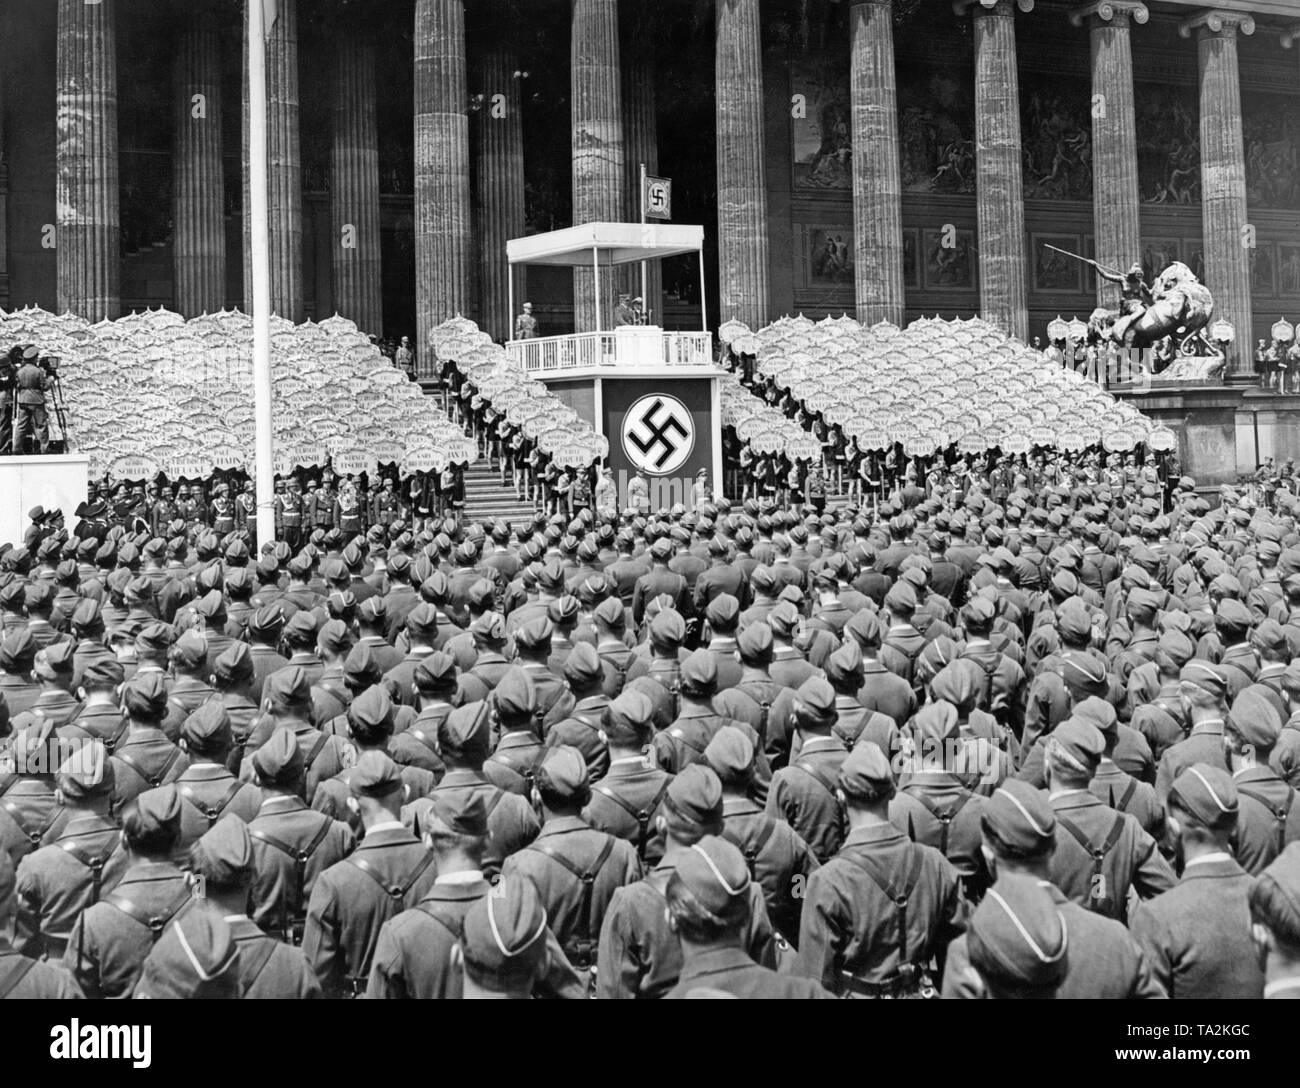 Adolf Hitler during a speech under a canopy with swastika during the state ceremony for the Condor Legion in the Lustgarten on the Museum Island on June 6, 1939. Next to him is Hermann Goering. In the foreground stand the lined up legionaries. To the right and left of the lectern are Hitler Youth members with signs bearing the names of fallen Spanienkaempfer (people who who fought for the Left in Spain). On the far left are film cameras. Adolf Hitler during a speech under a canopy with swastika at the state ceremony for the Condor Legion in the Lustgarten on the Museum Island on June 6, 1939. Stock Photo